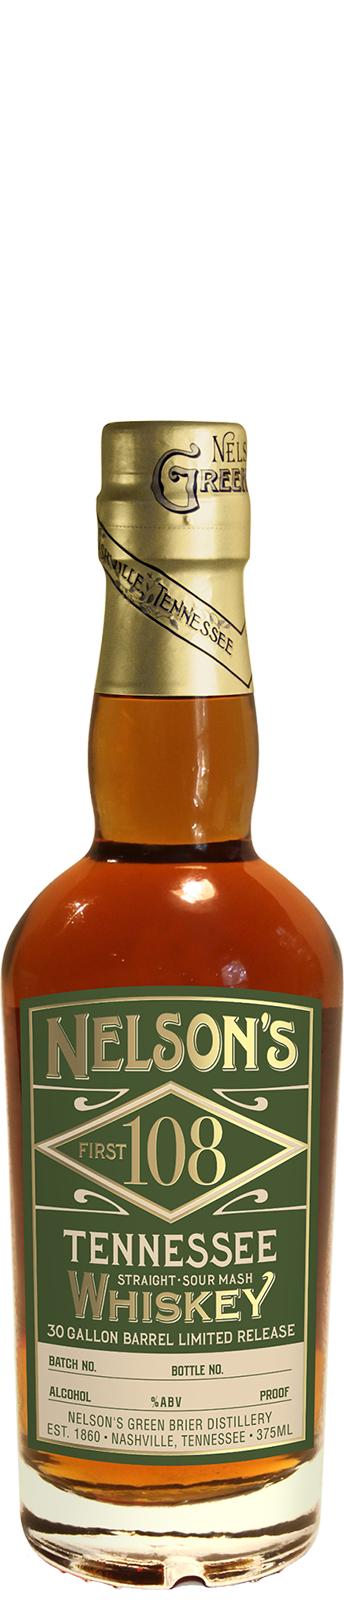 Nelson's 1st 108 Tennessee Whisky 30 Gallon Charred New American Oak 7 45% 375ml